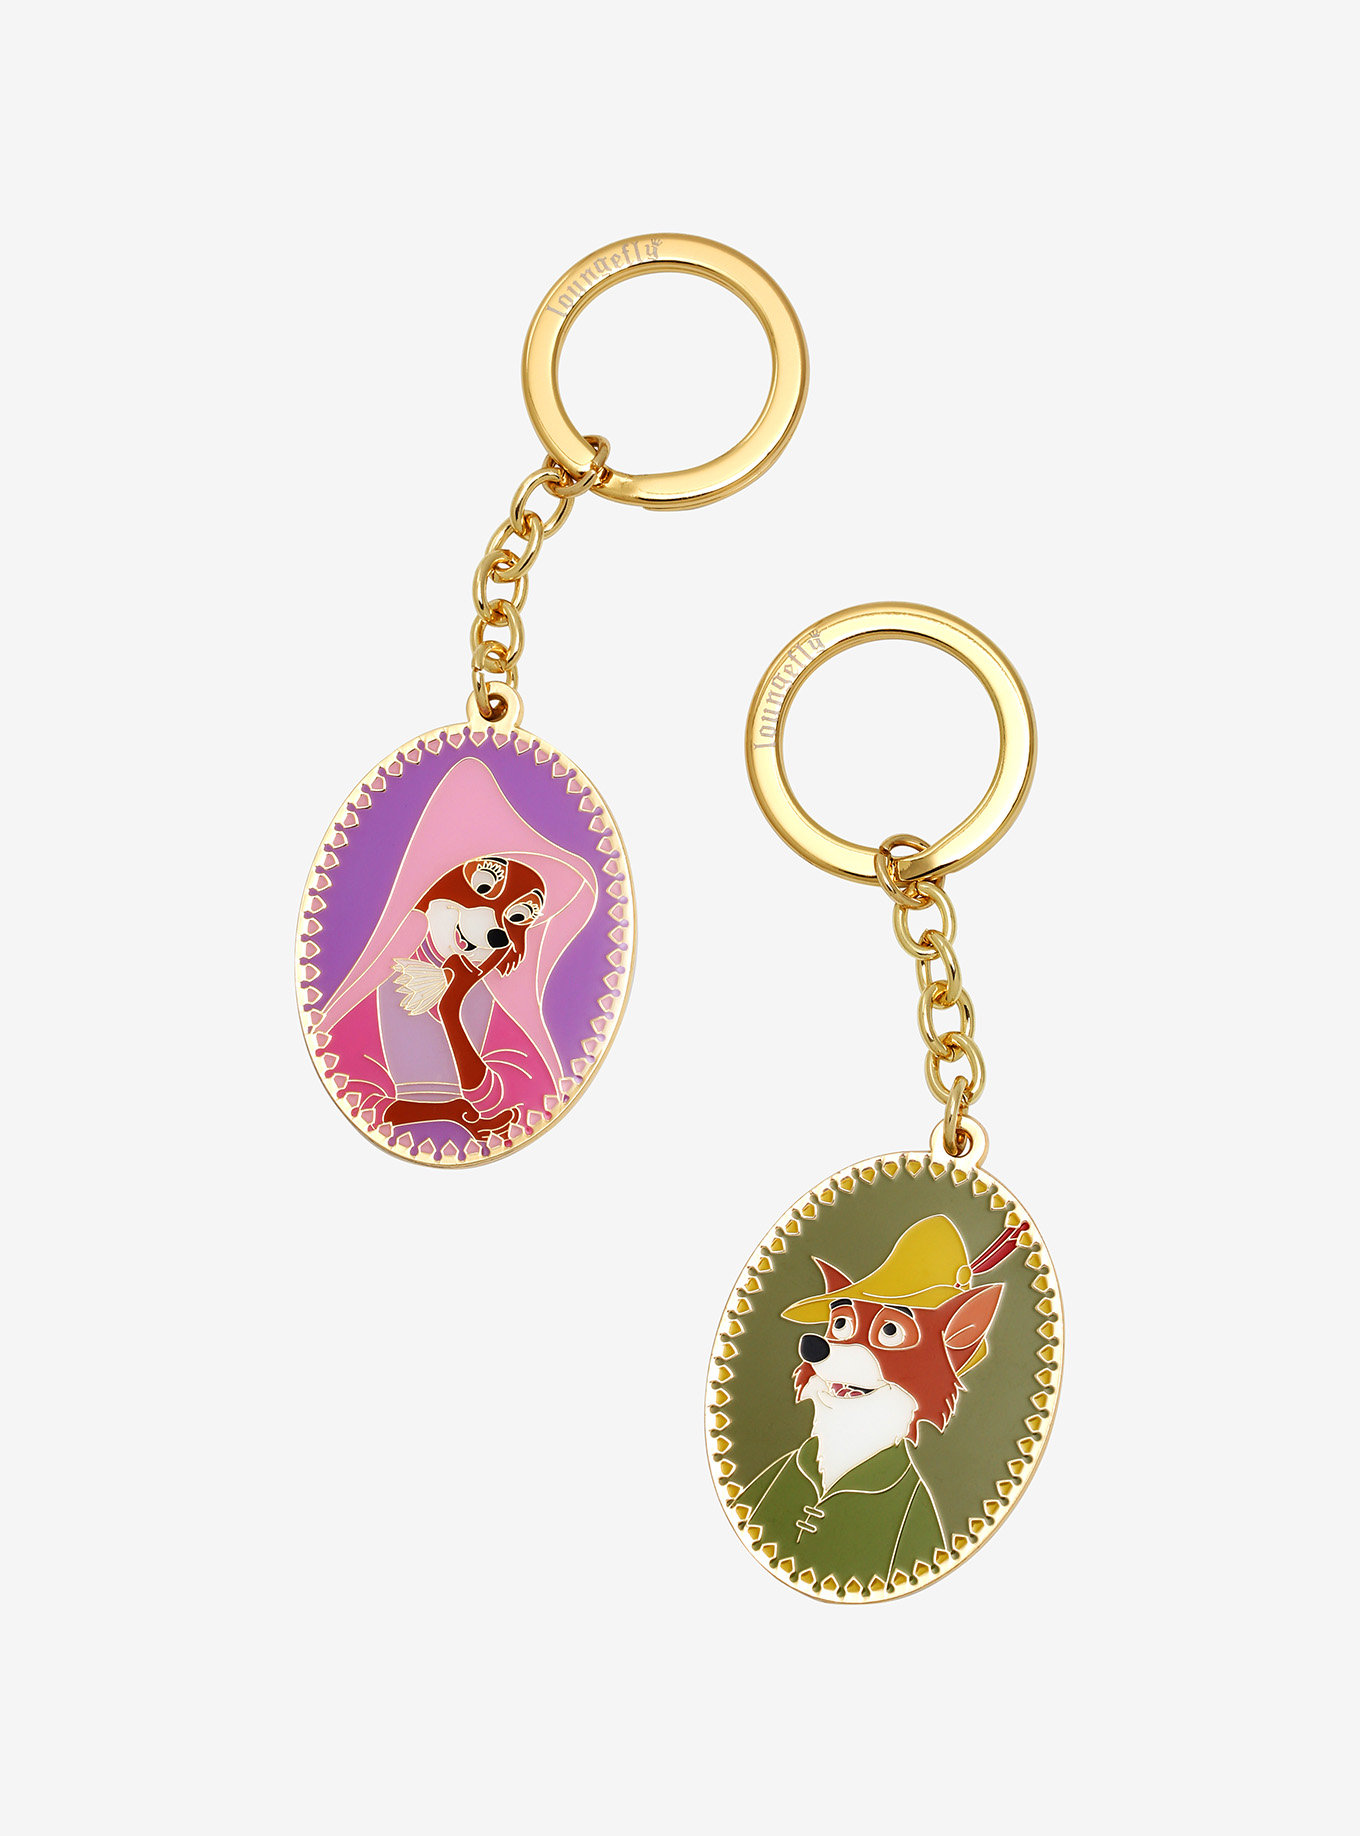 These Adorable Disney Couples Keychains Are the Perfect